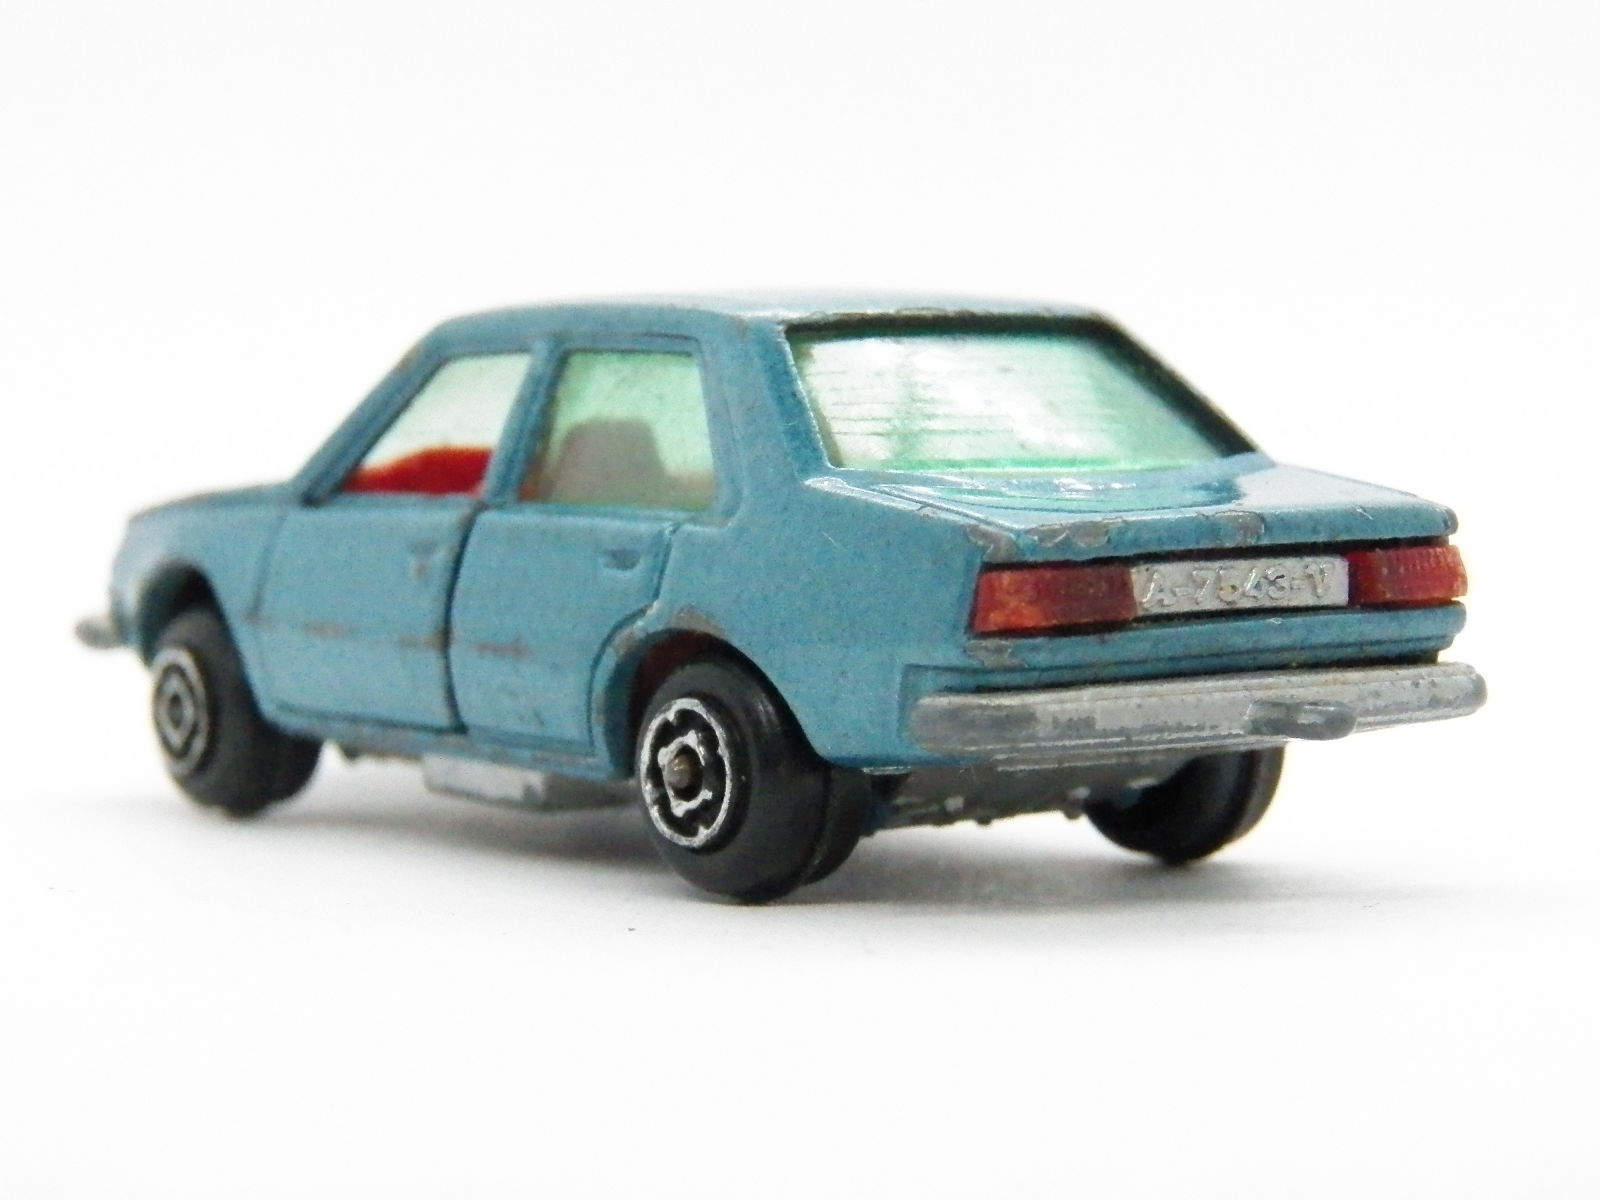 Illustration for article titled Guisval 1:64 Renault 18 GTS